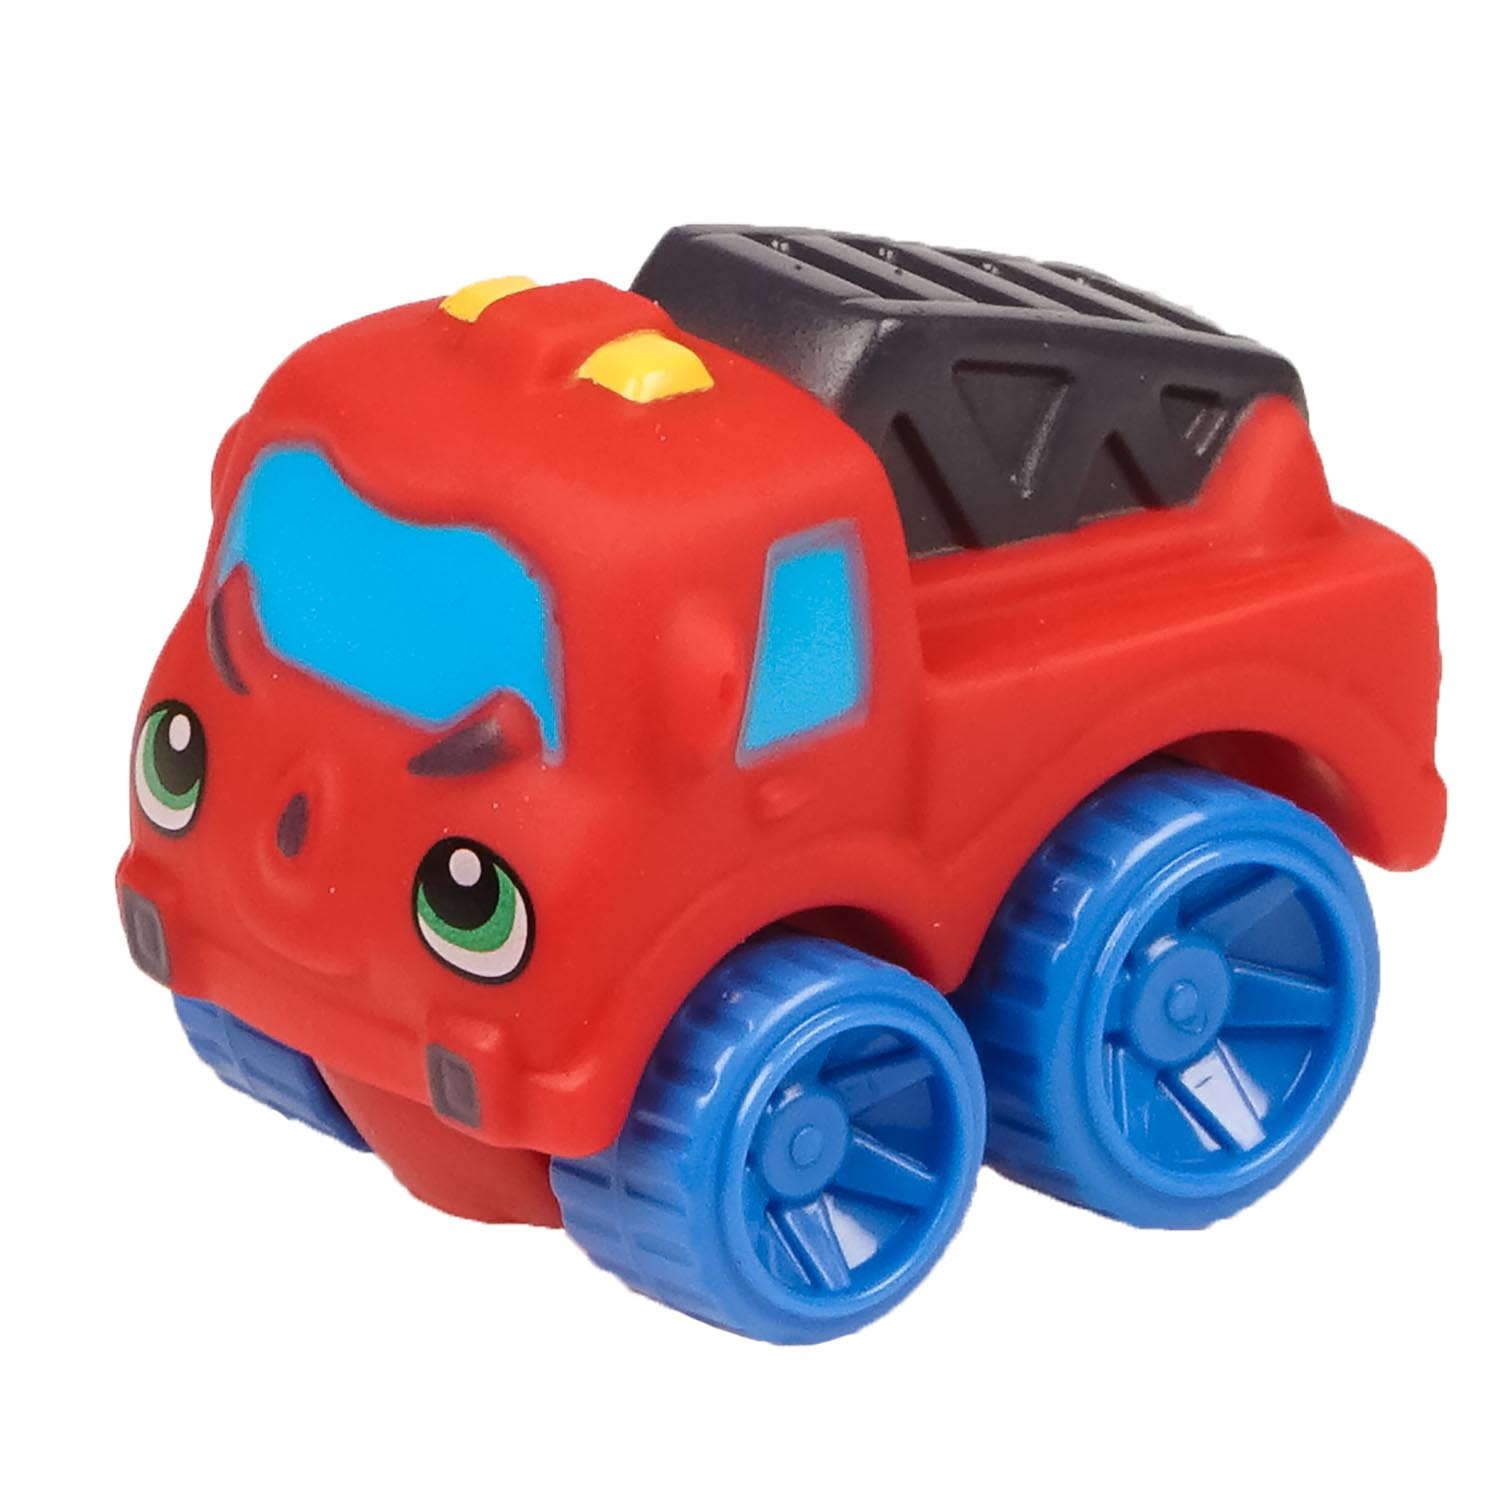 Cute Vehicle Toy 5 Pack in Assorted styles Image 4